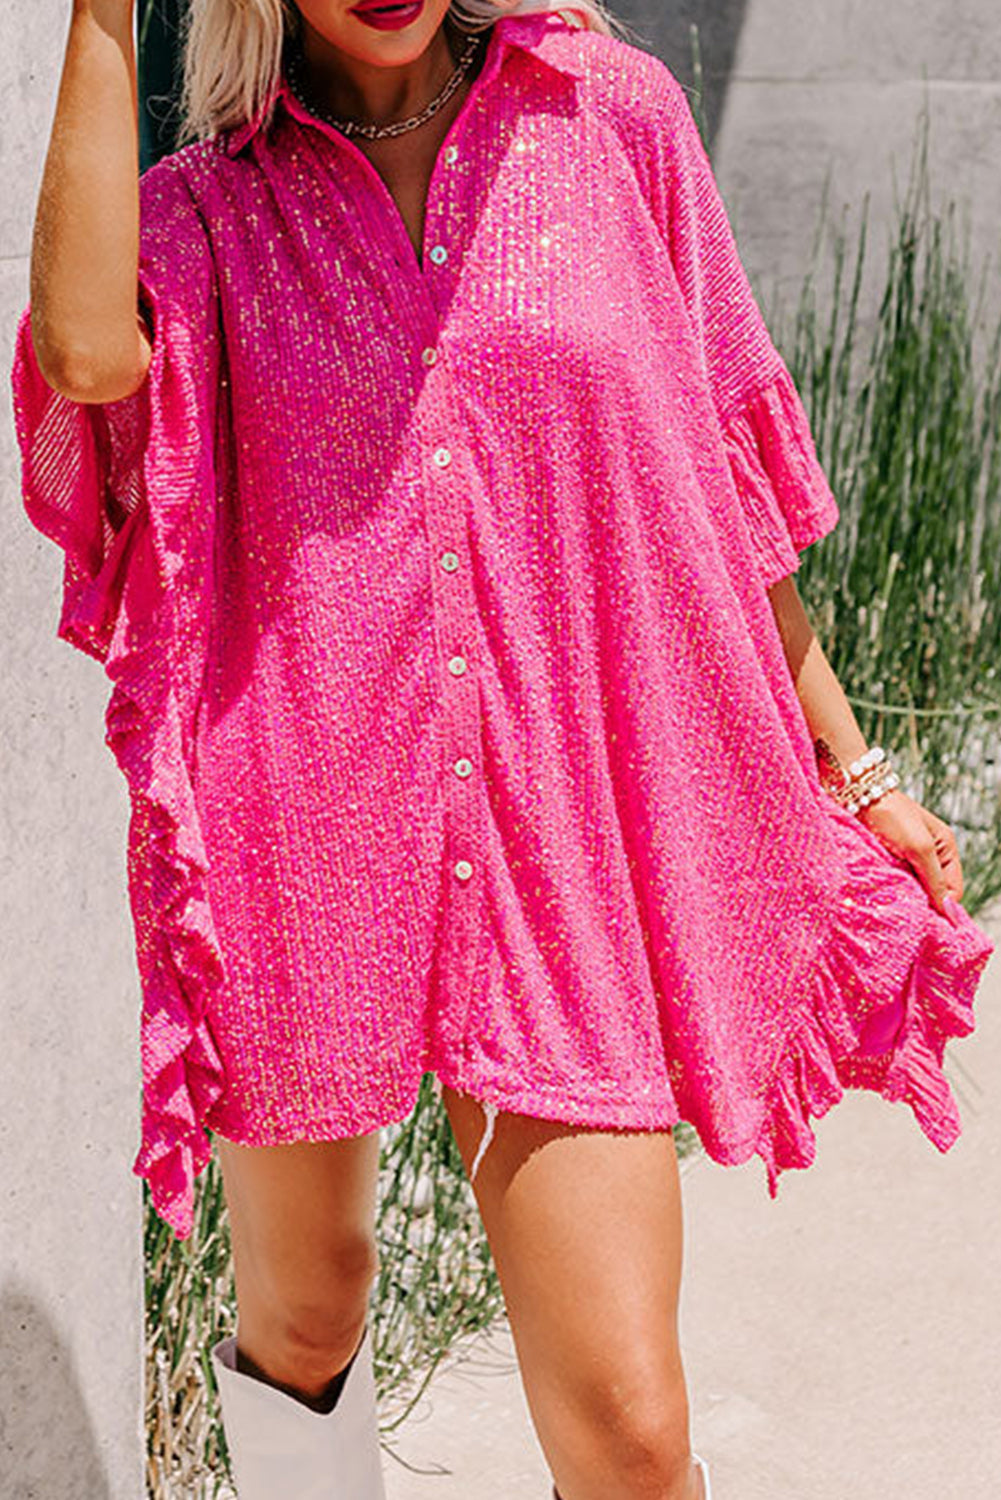 Strawberry Pink Ruffle Trim Sequined Loose Tunic Shirt Pre Order Dresses JT's Designer Fashion